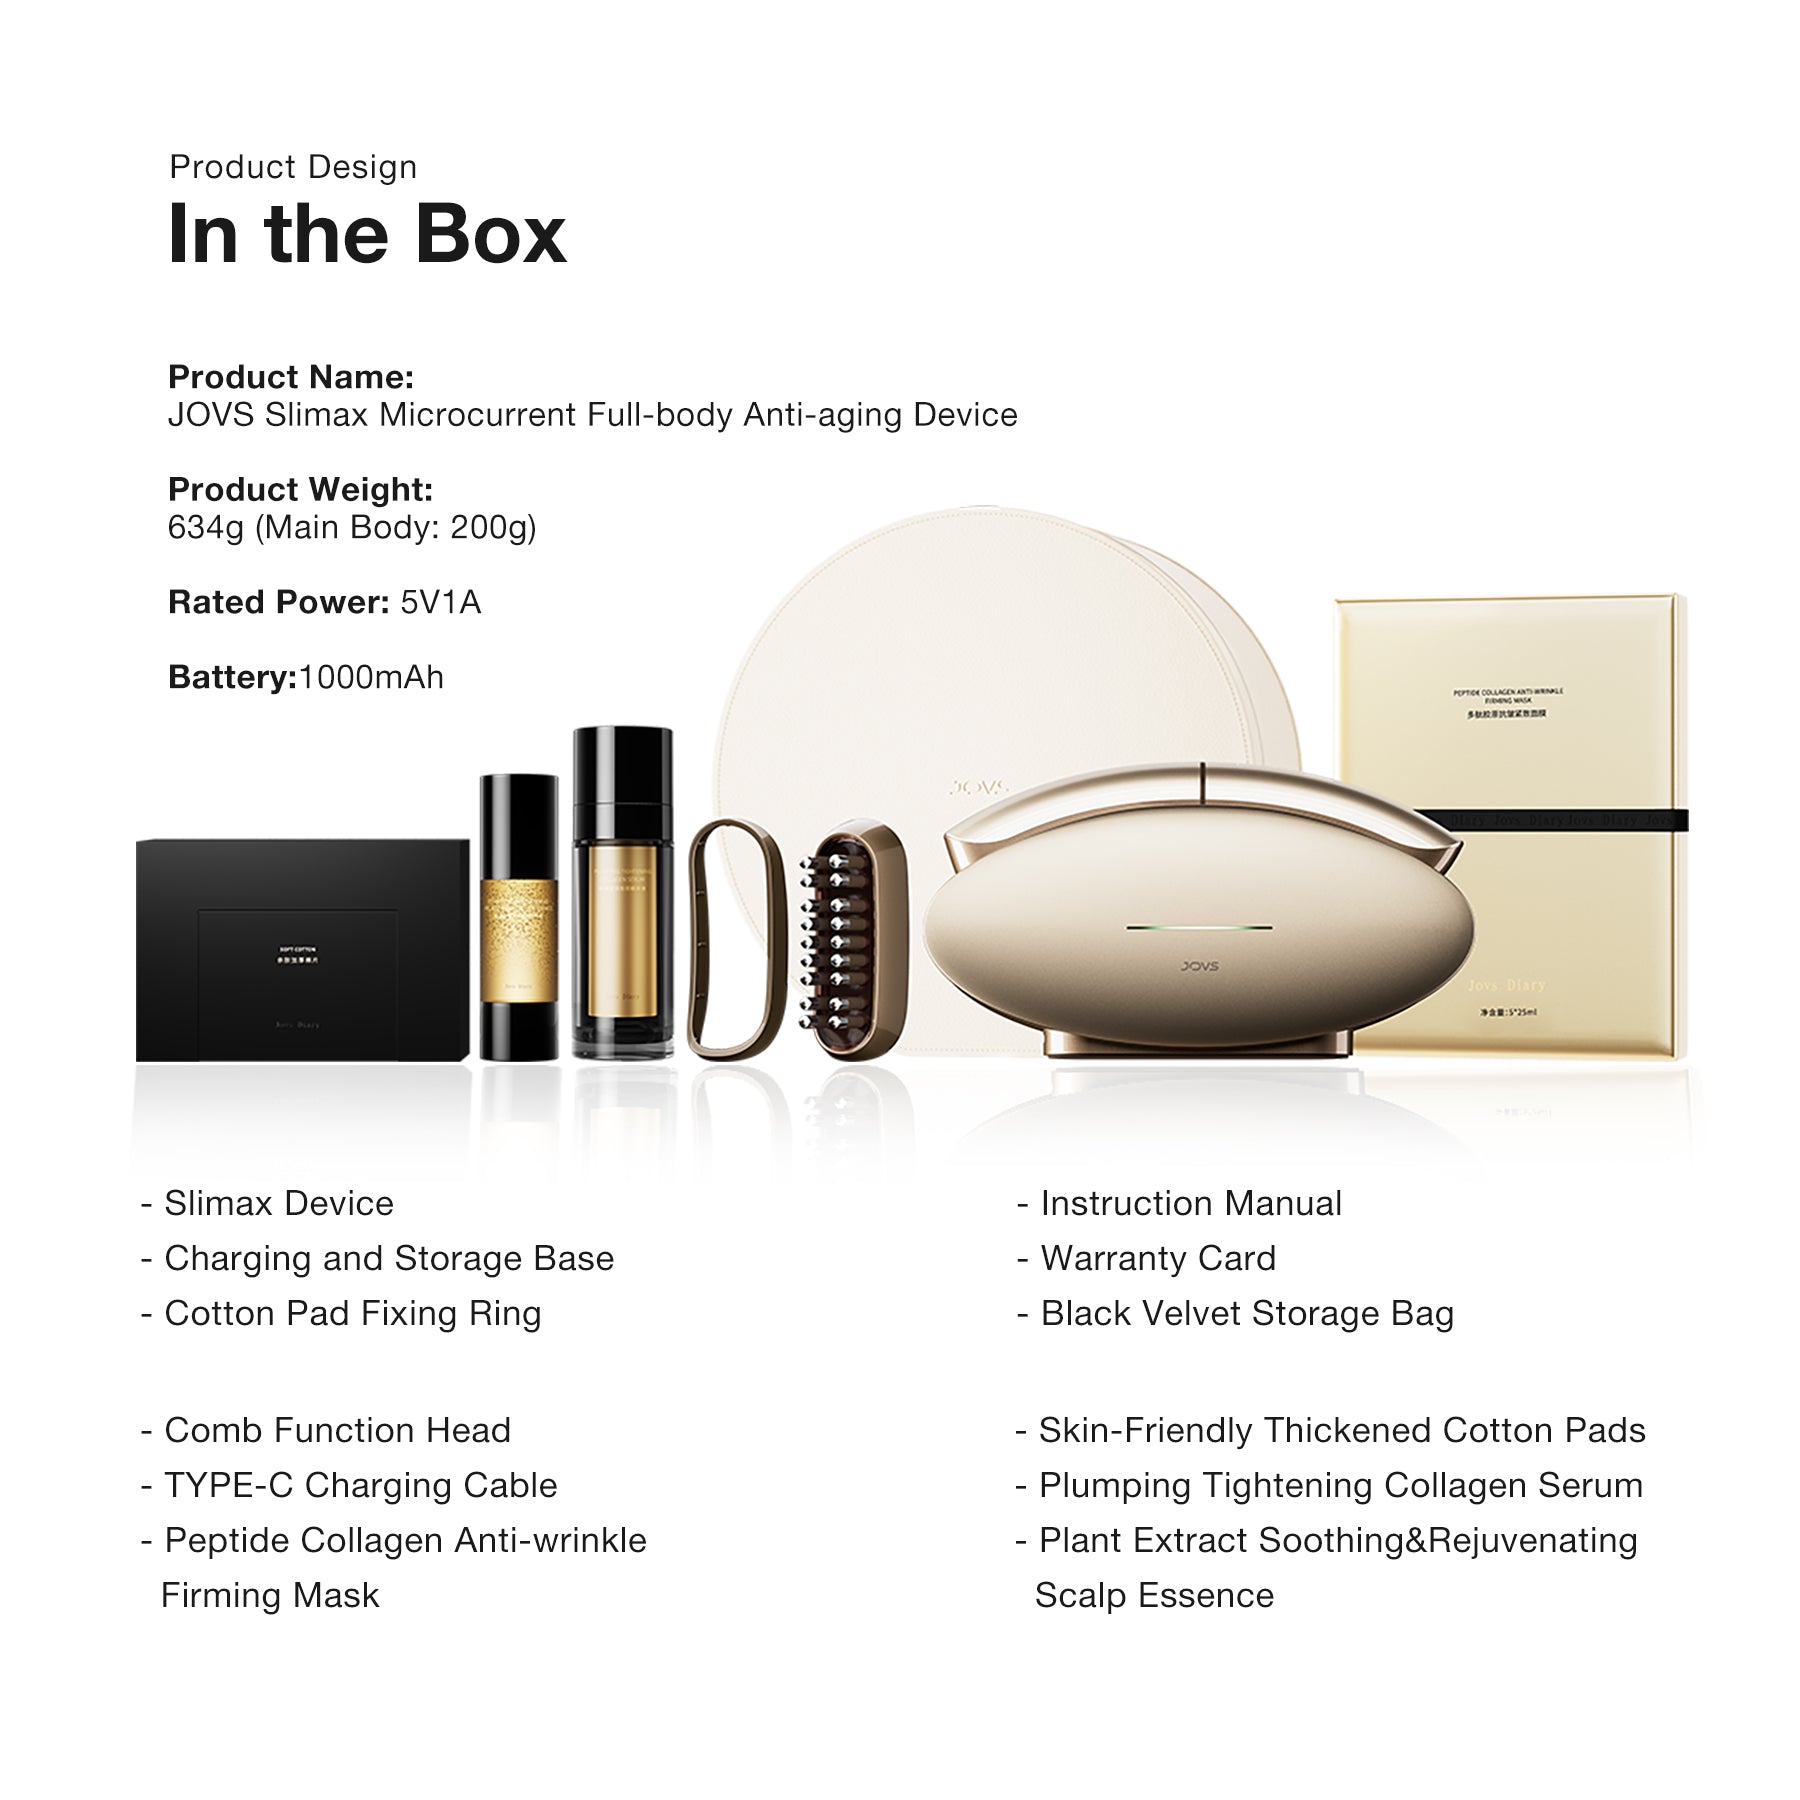 Contents of the JOVS Slimax Microcurrent Full-body Anti-aging Device package, including device, charging base, and skin rejuvenation essentials.